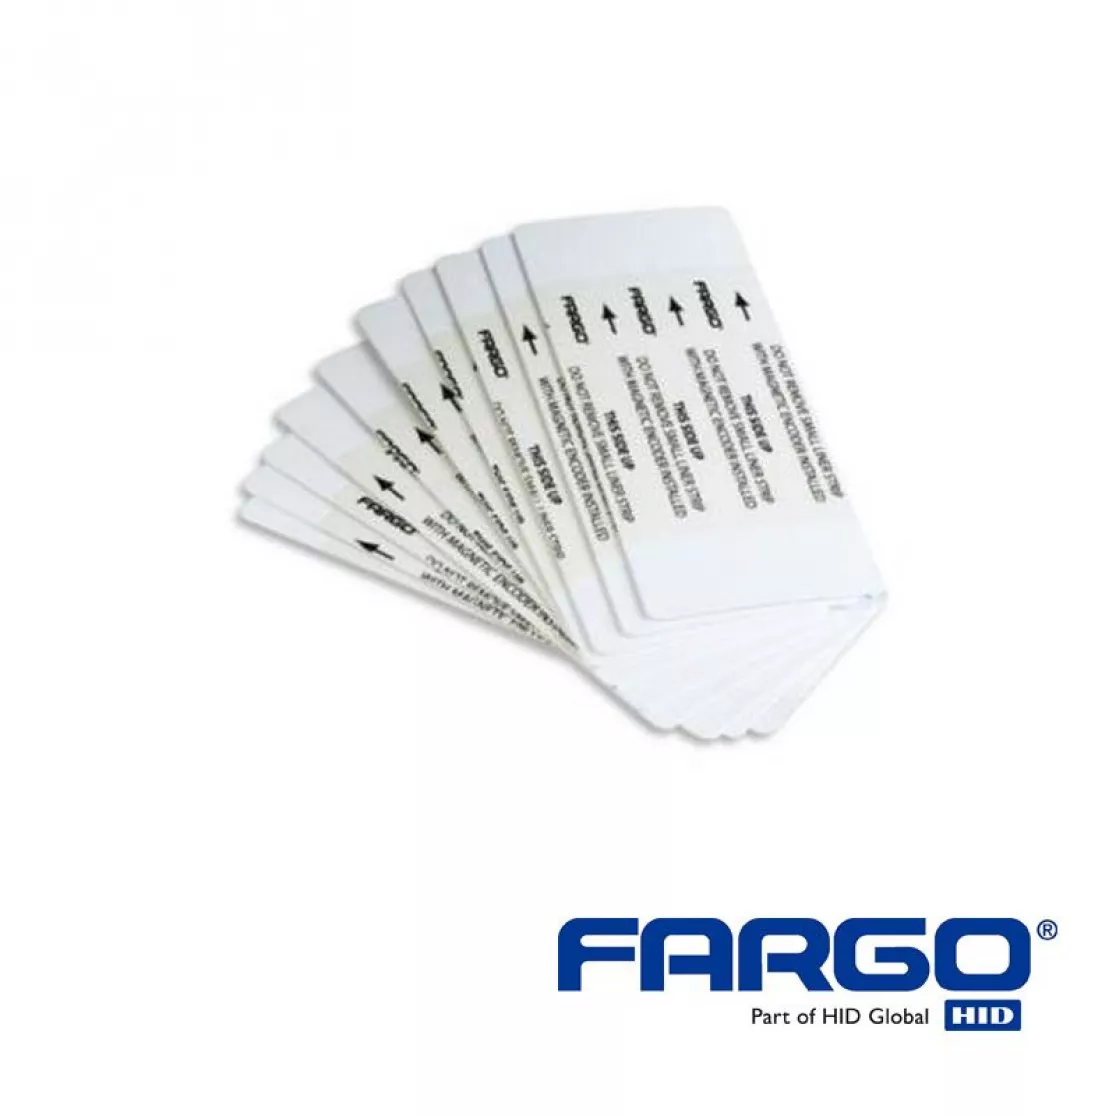 HID Fargo HDP5000 cleaning cards